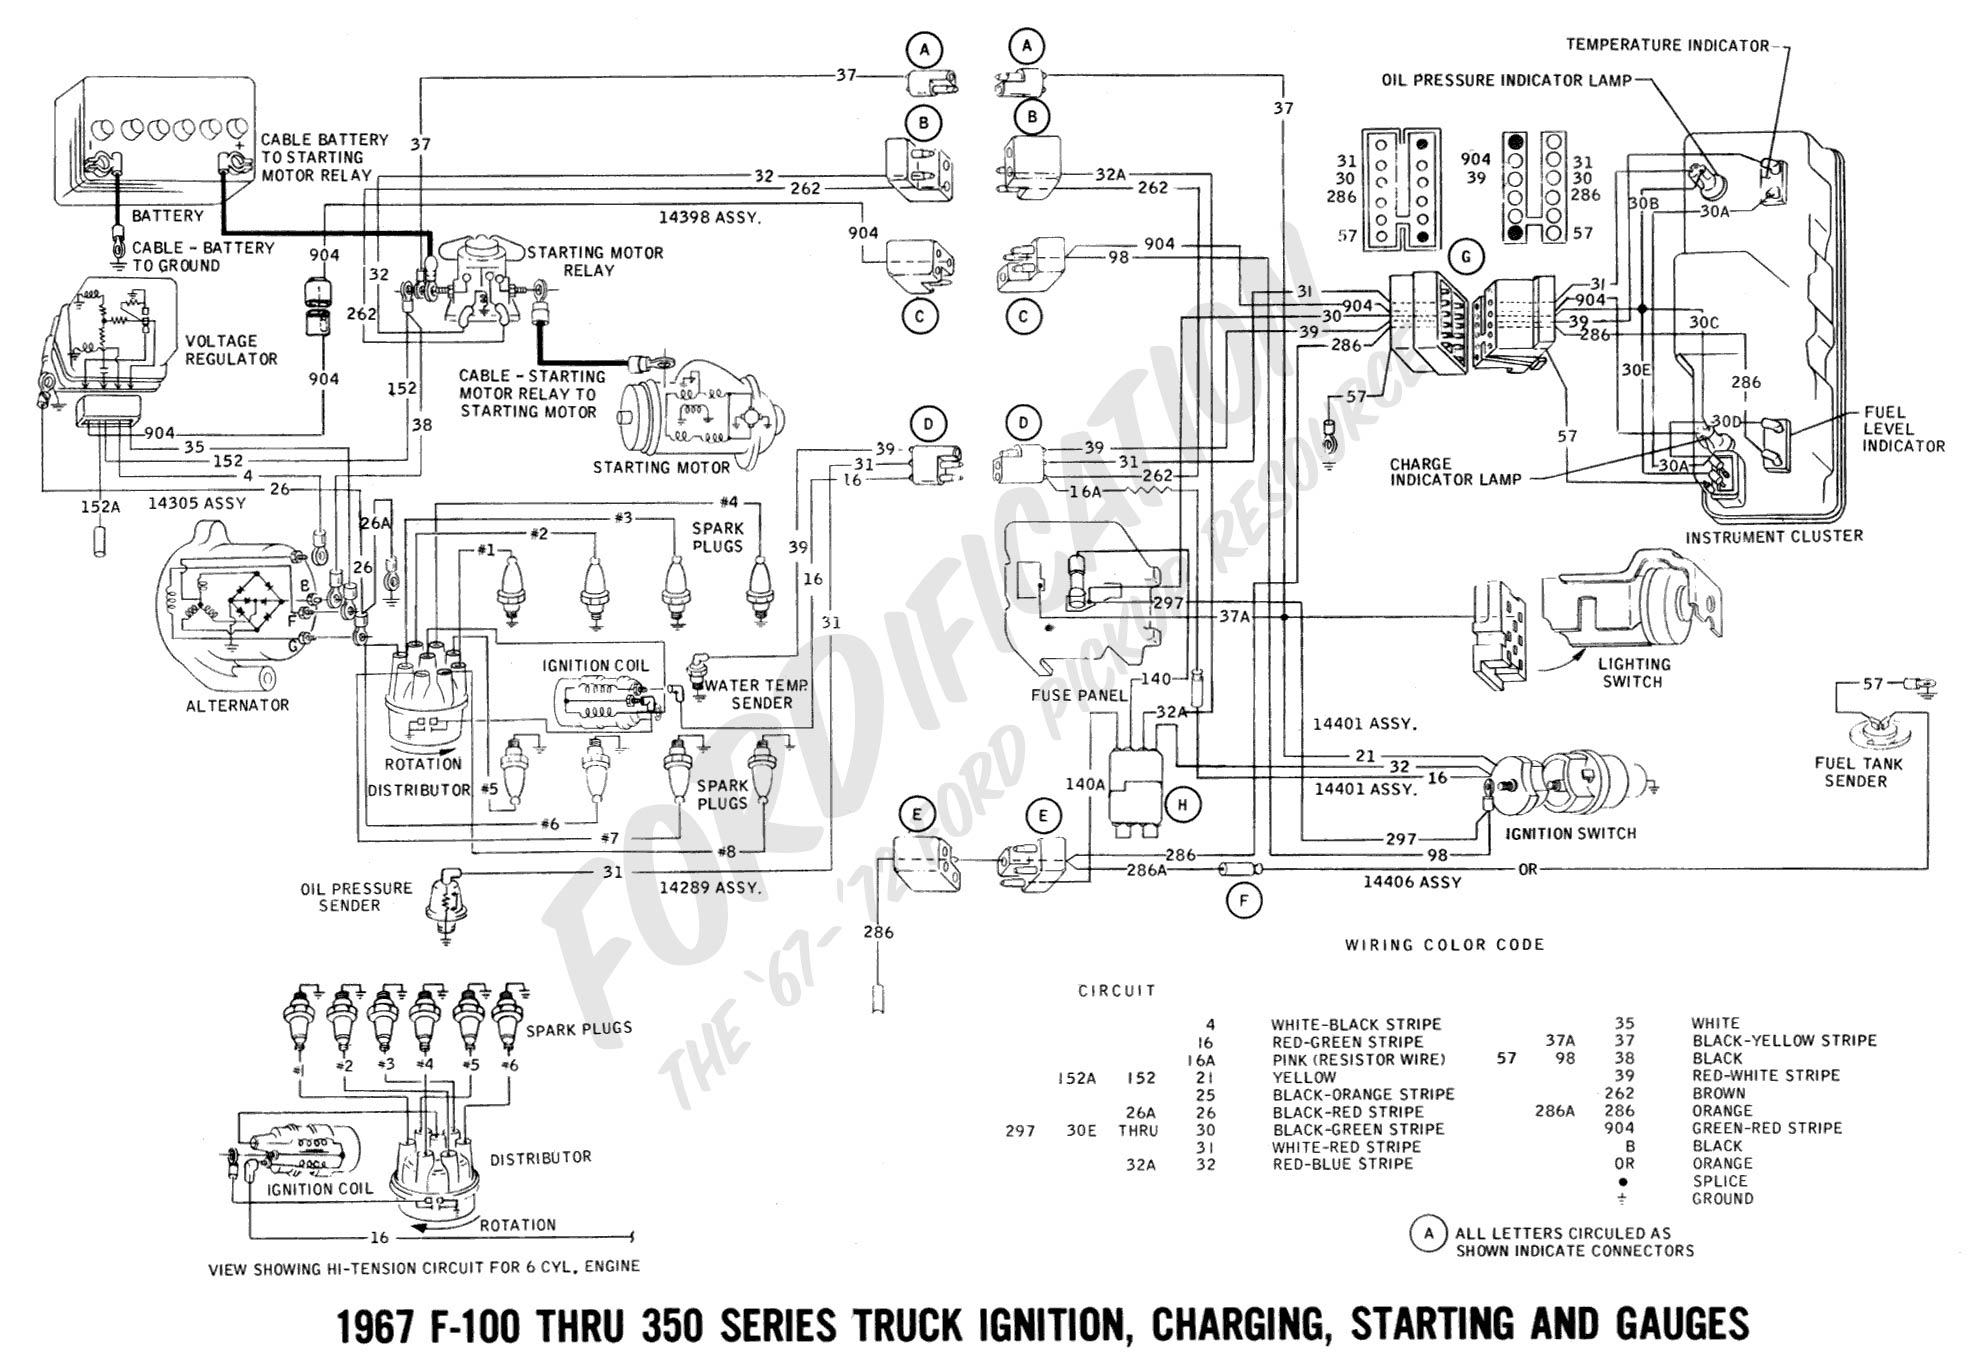 Ford Truck Technical Drawings and Schematics - Section H - Wiring Diagrams  1974 Ford F100 Ignition Switch Wiring Diagram    FORDification.com